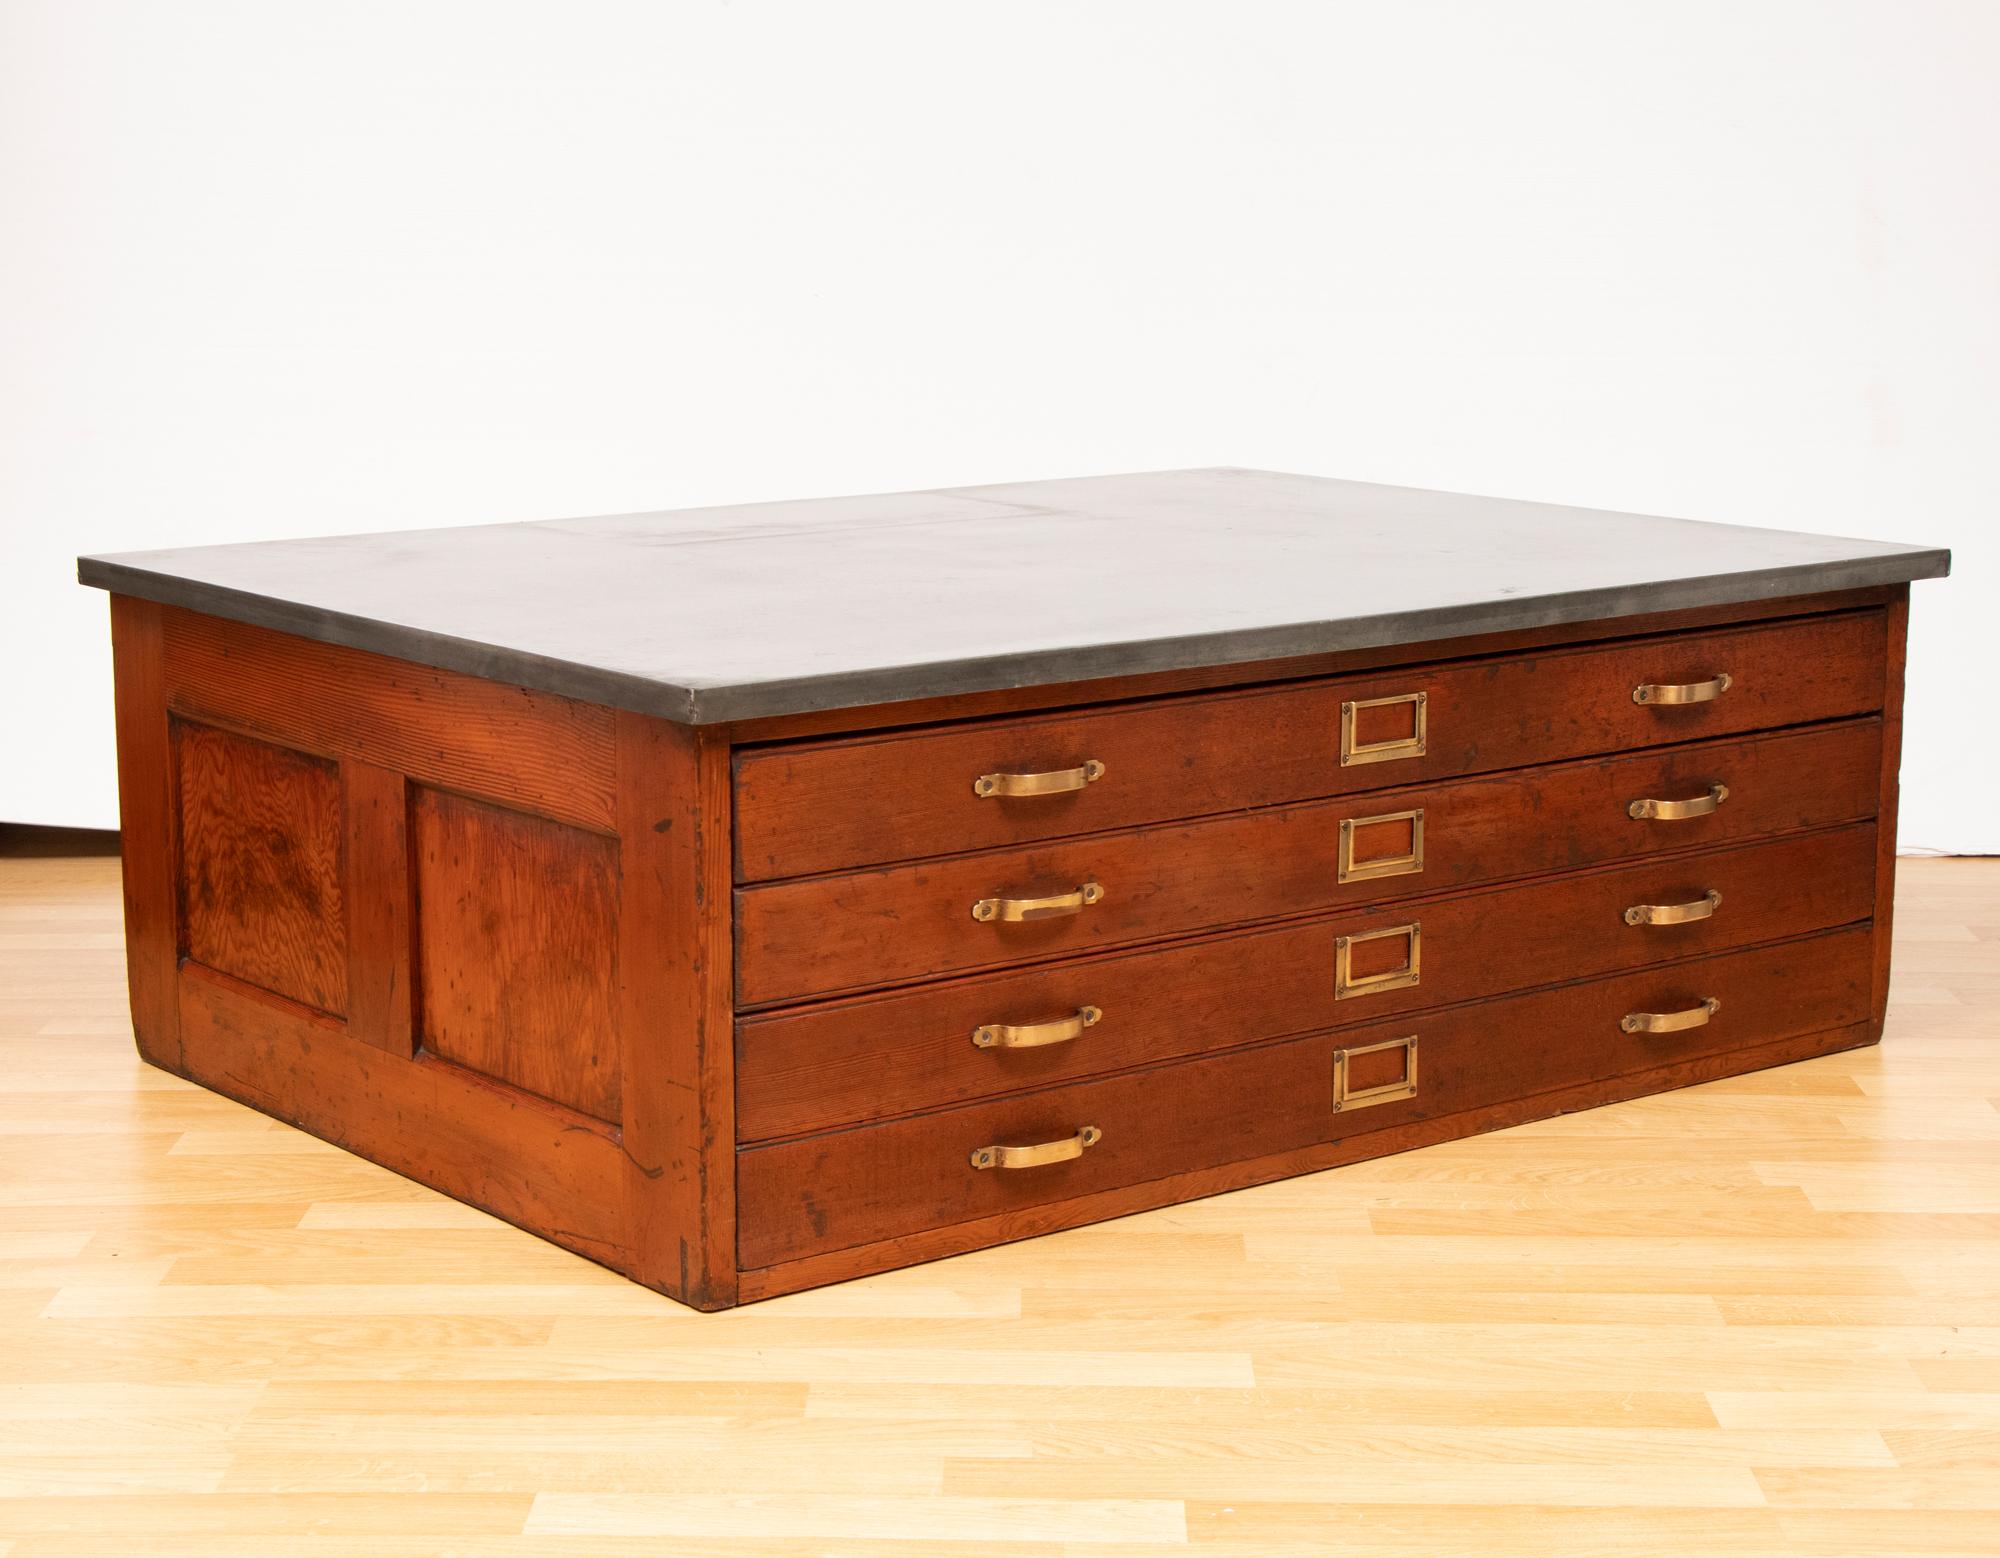 A very handsome antique oak plan or map chest which has been converted into a low coffee table with a zinc top added later. The chest comes with four detachable wooden casters which can be added depending on your requirements

The four deep